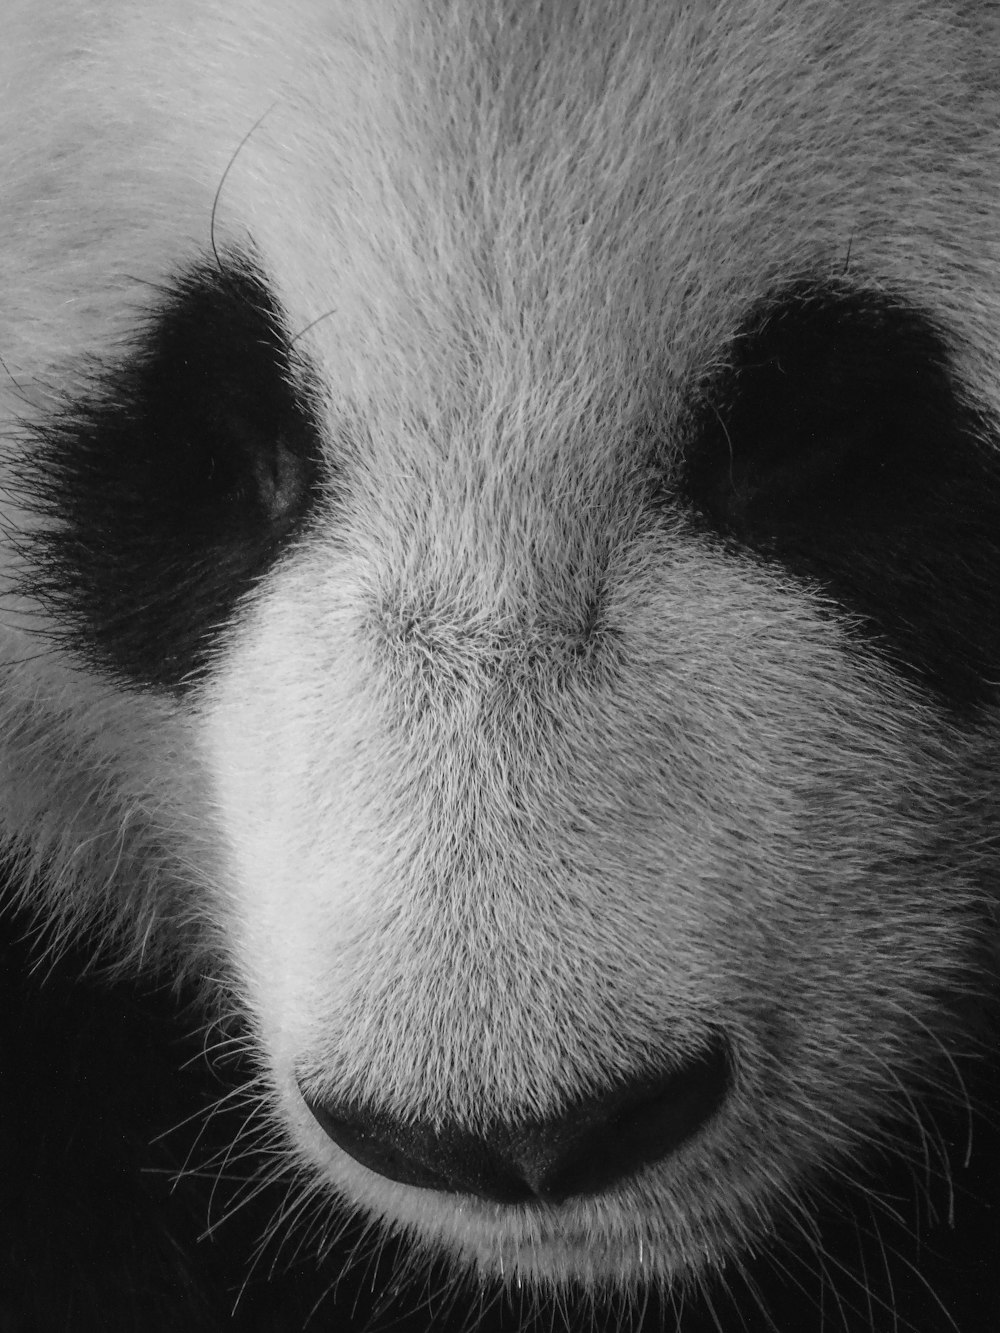 white and black panda in close up photography